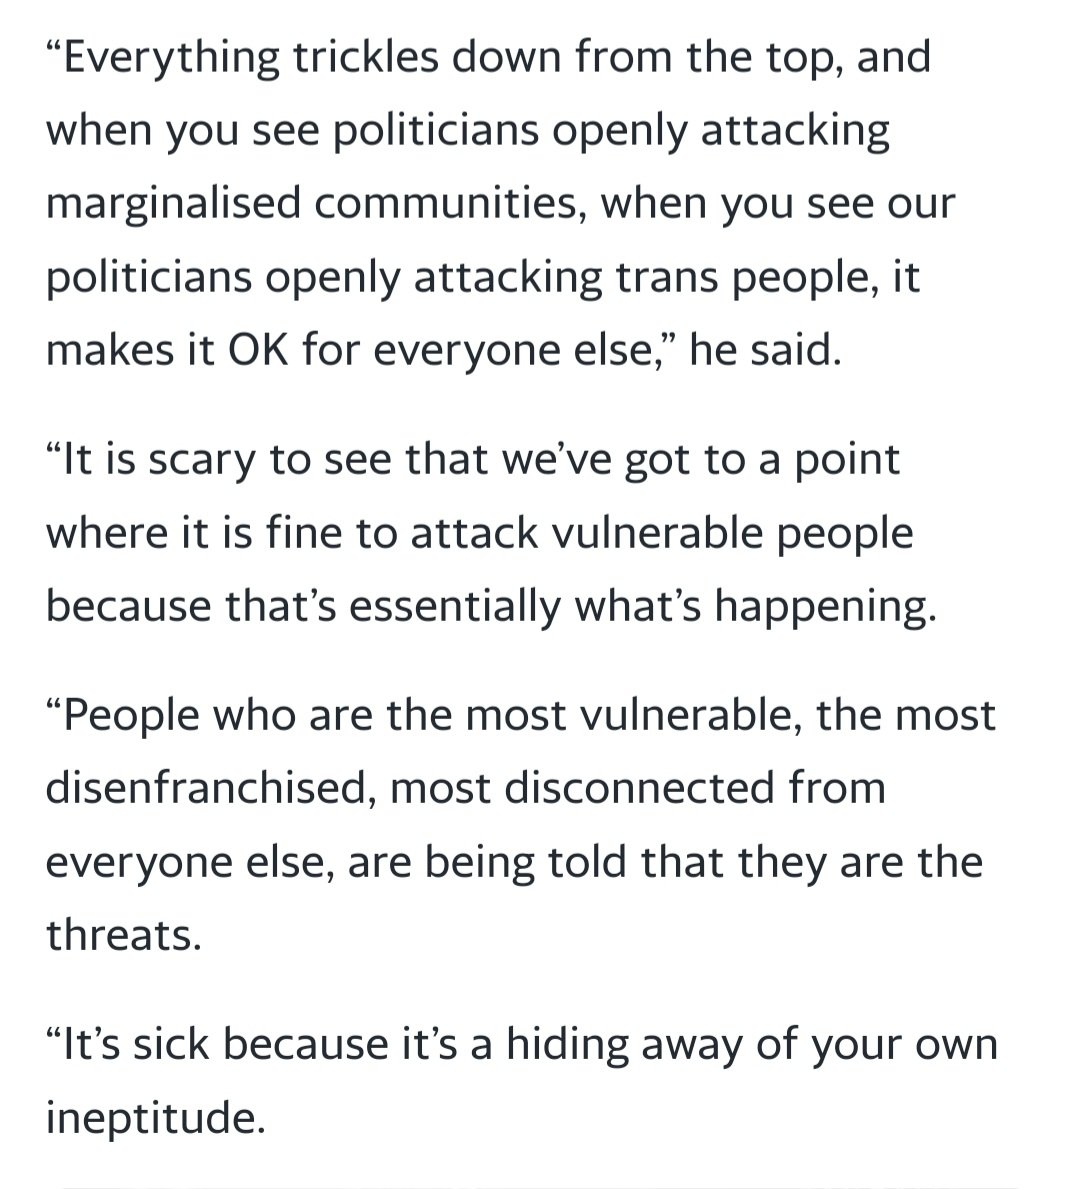 “You’re going to put the blame on immigrants, Black and brown people, trans people, queer people, to hide the fact that you are not doing anything for people? It’s easier to just create discord among people. It’s divide & conquer, isn’t it?” - Ncuti Gatwa on the Tory government